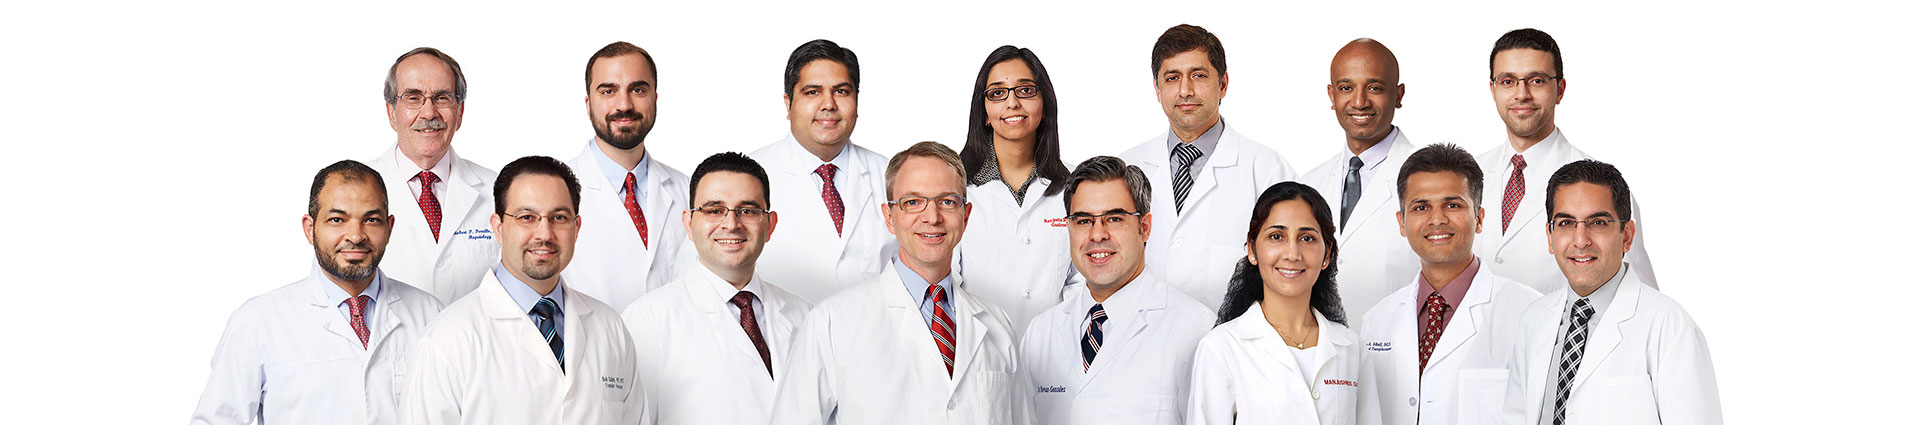 Baylor Scott & White Liver Consultants of Texas doctors group photo